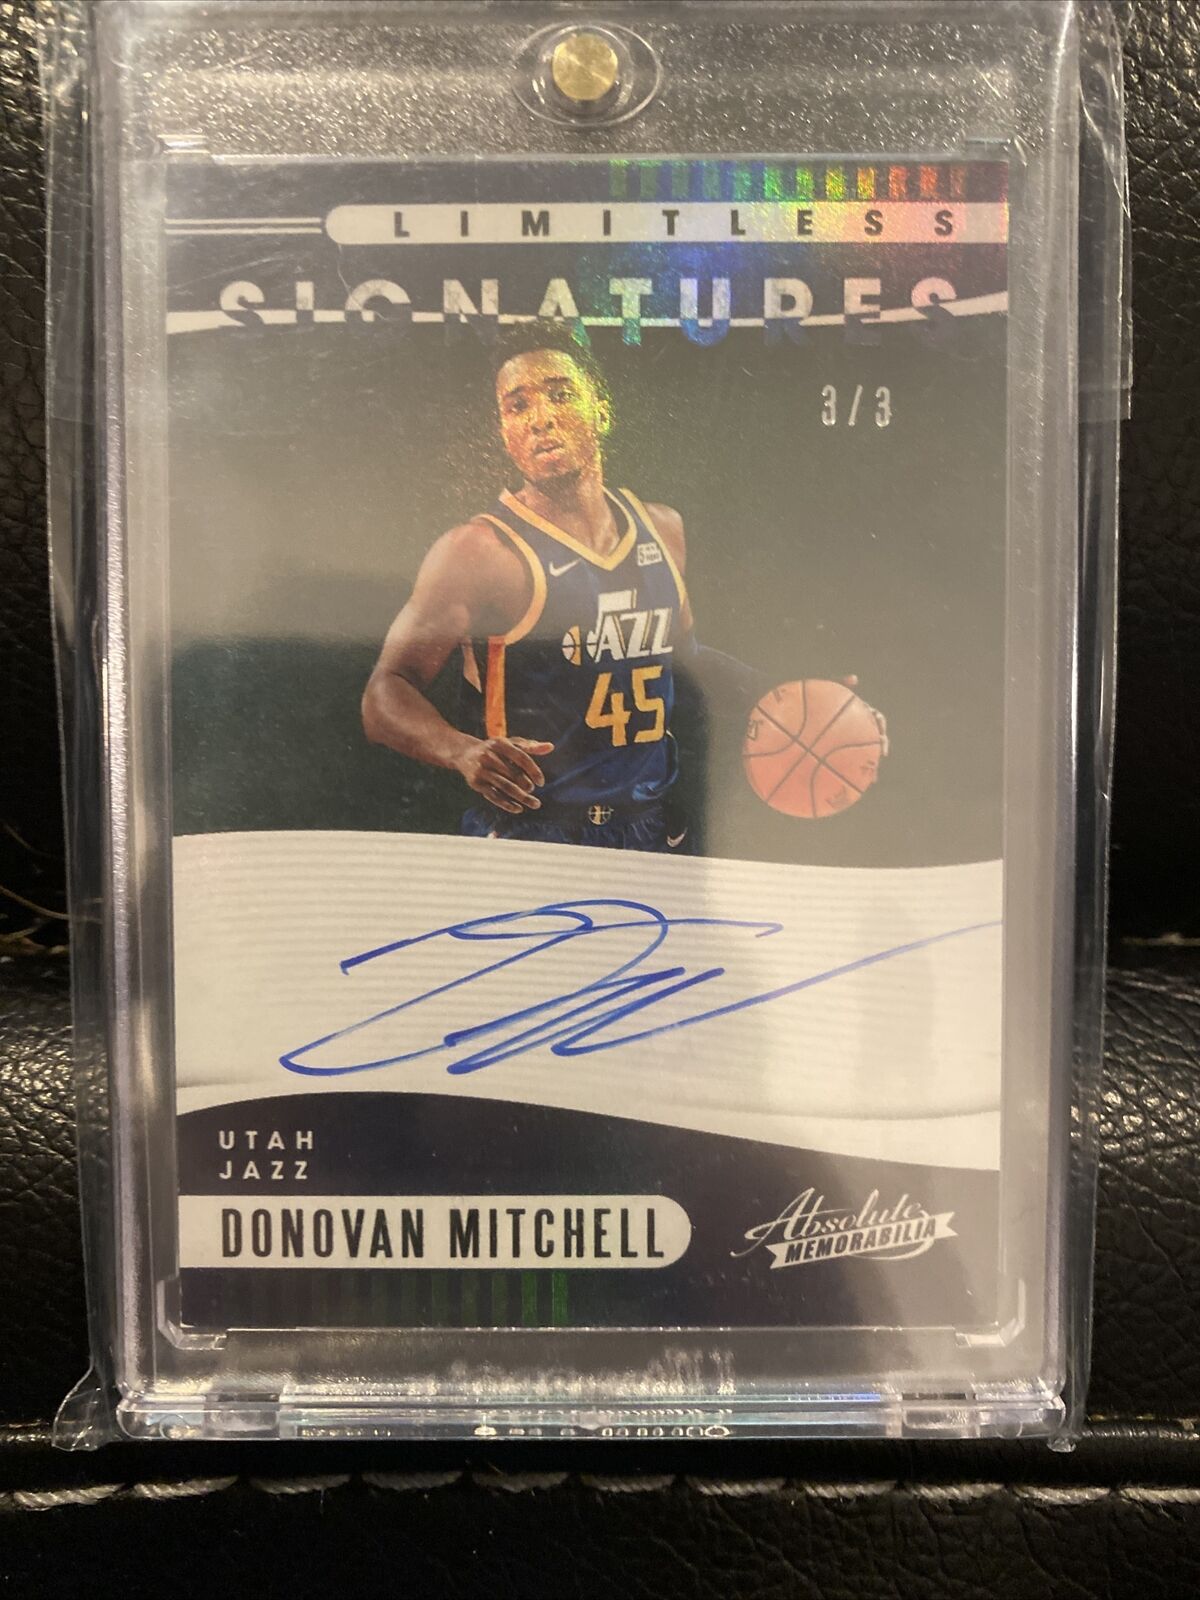 2019 Panini Absolute Donovan Mitchell Auto #3/3 Limitless Signatures Green